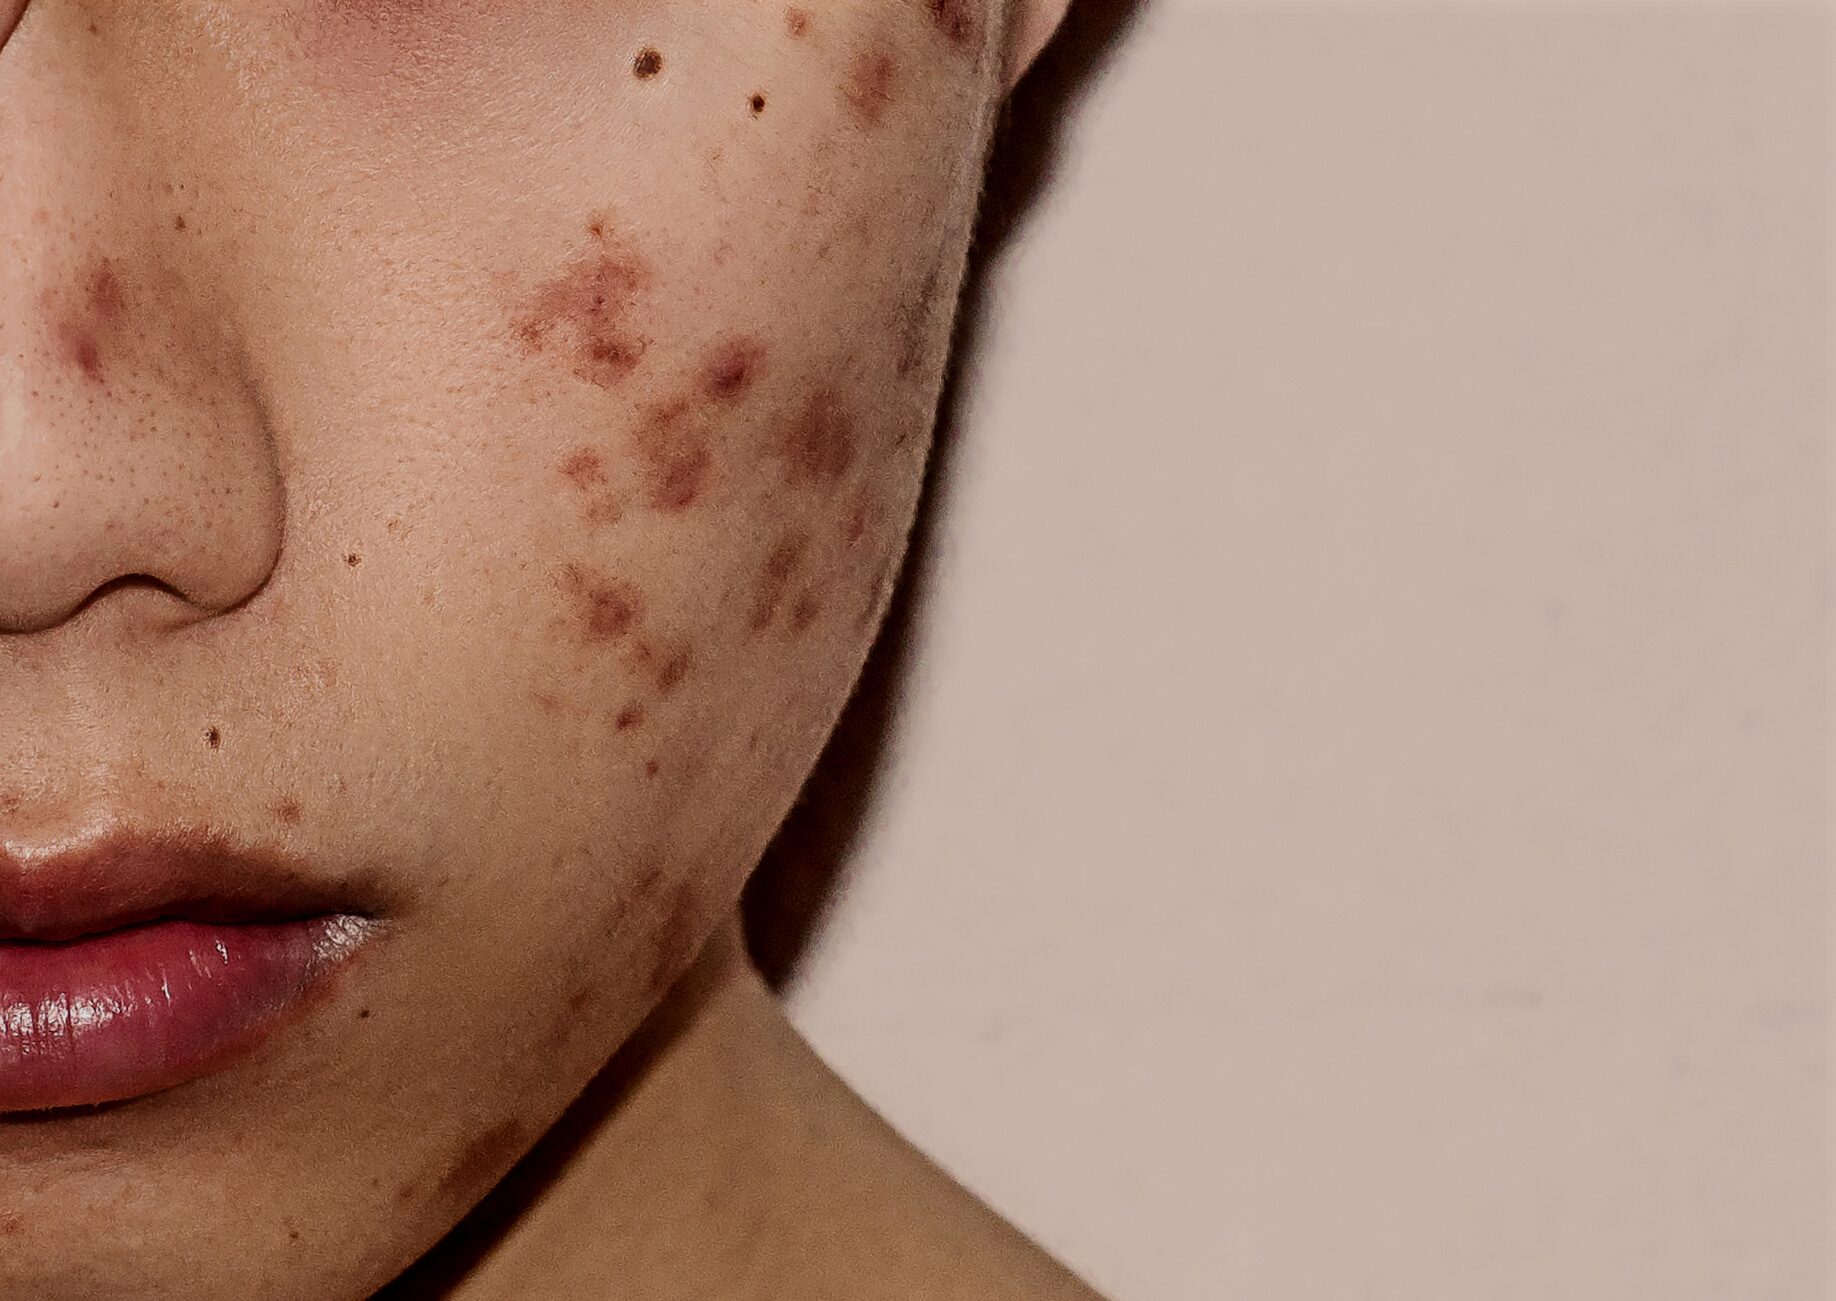 Person's Face with Acne Scars